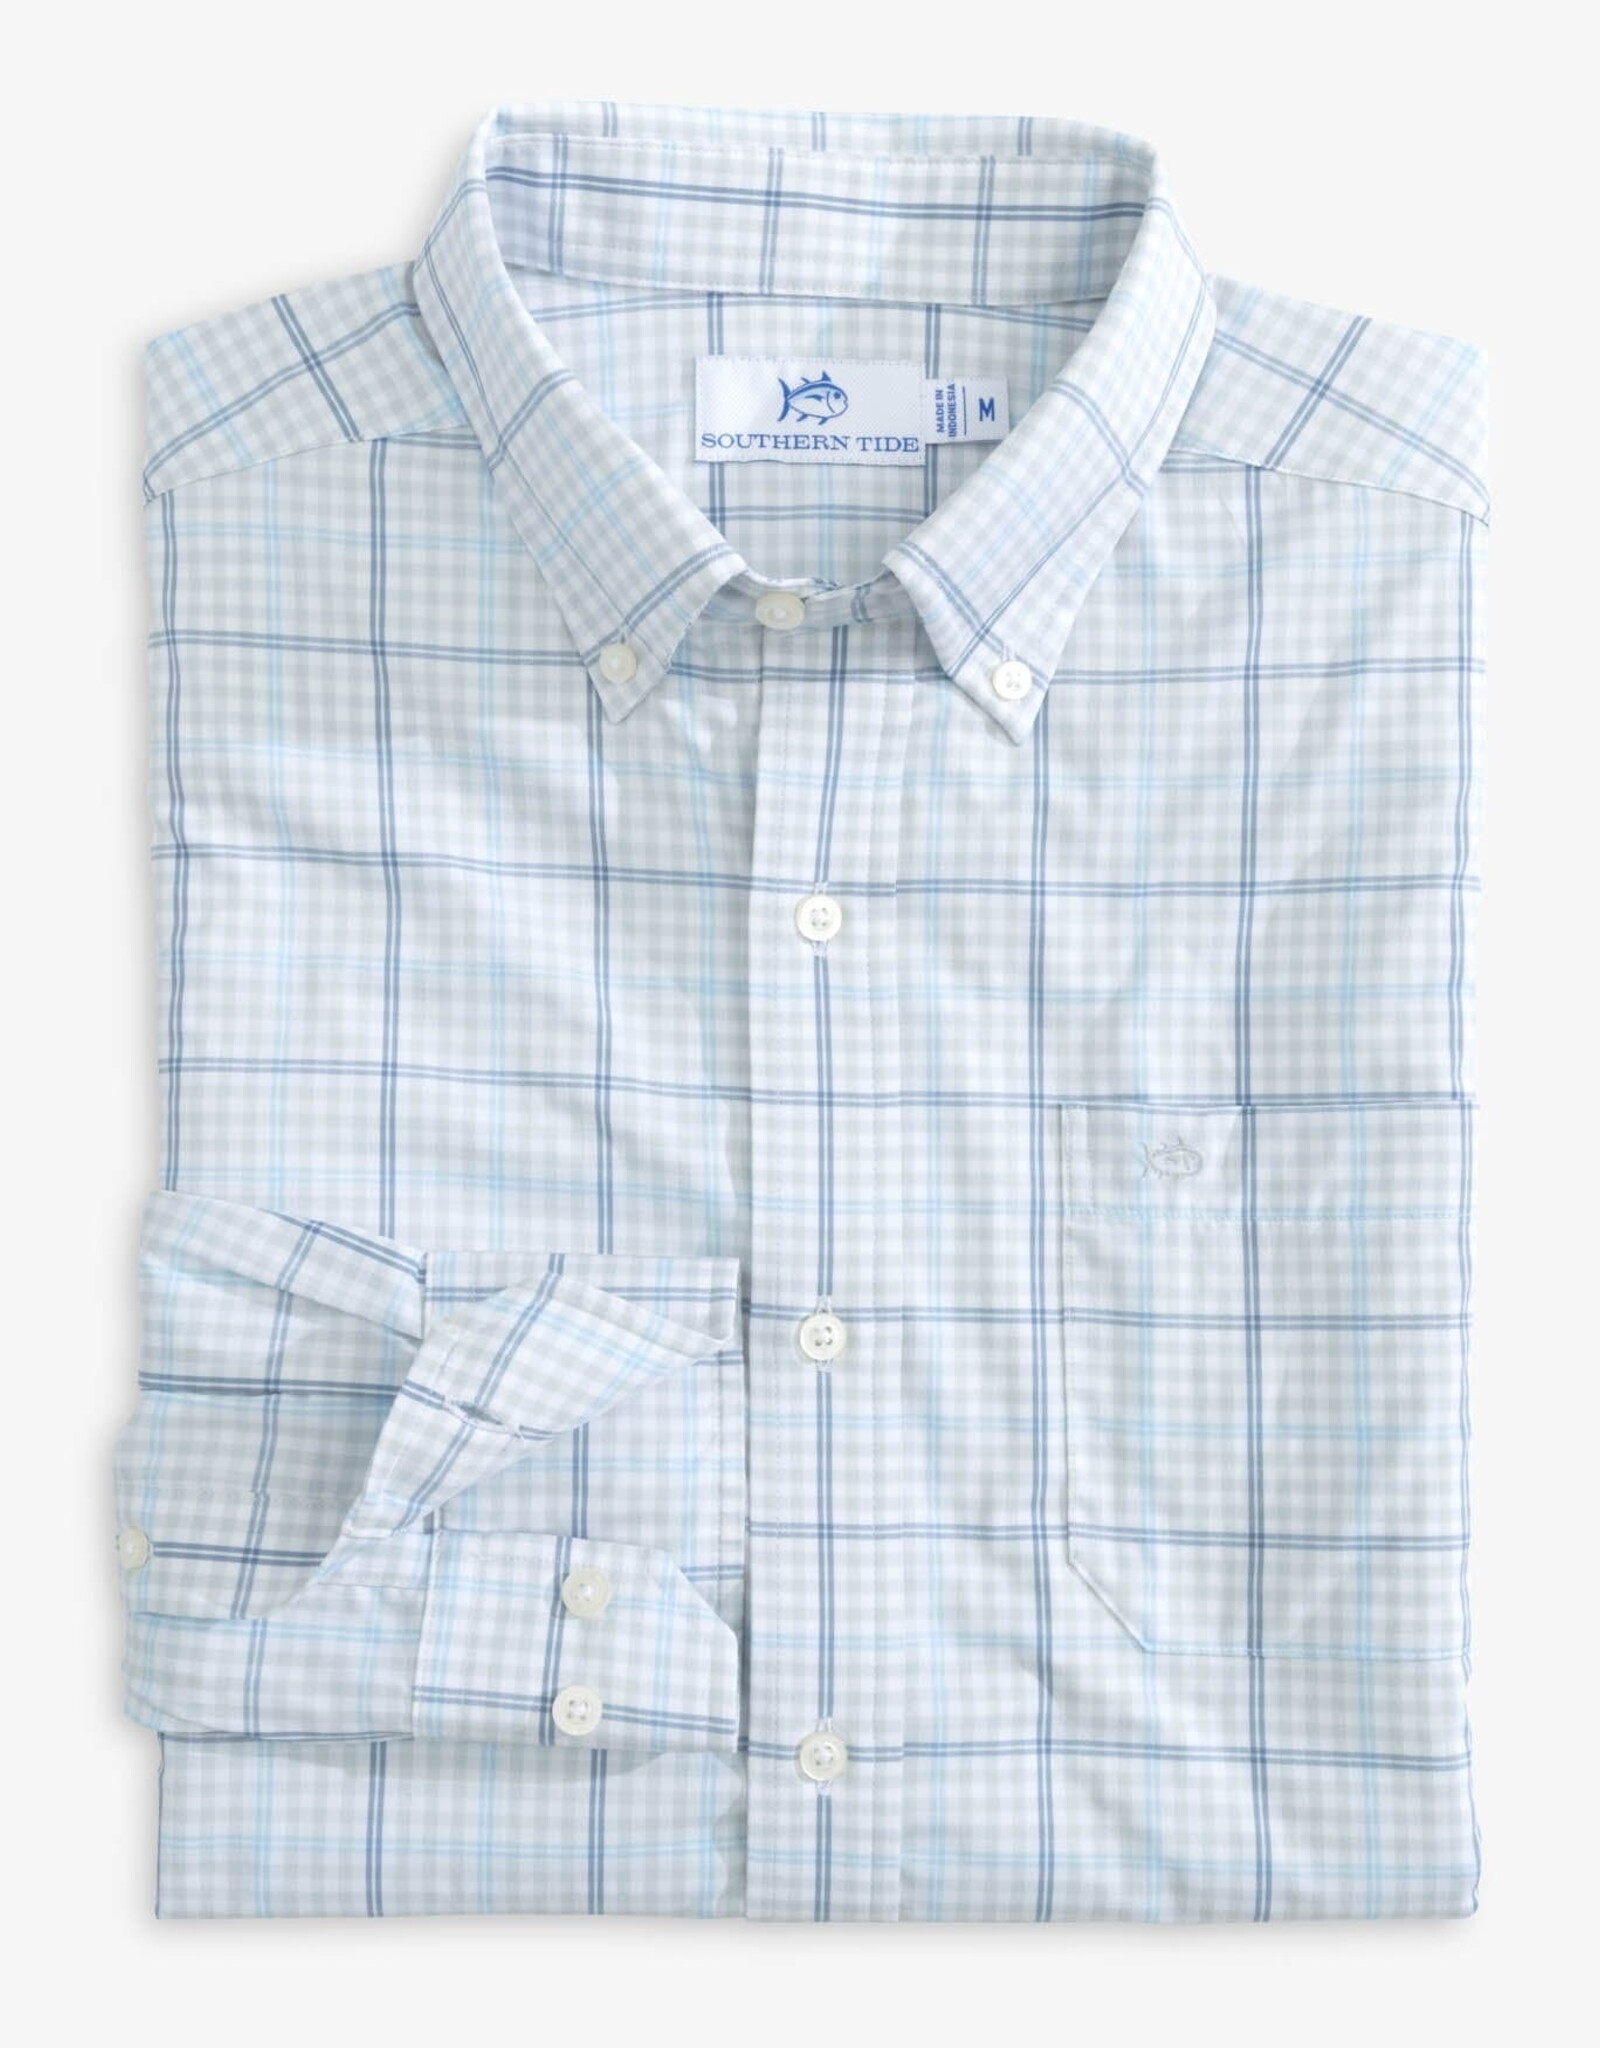 Southern Tide IC Rainer Check Sportshirt